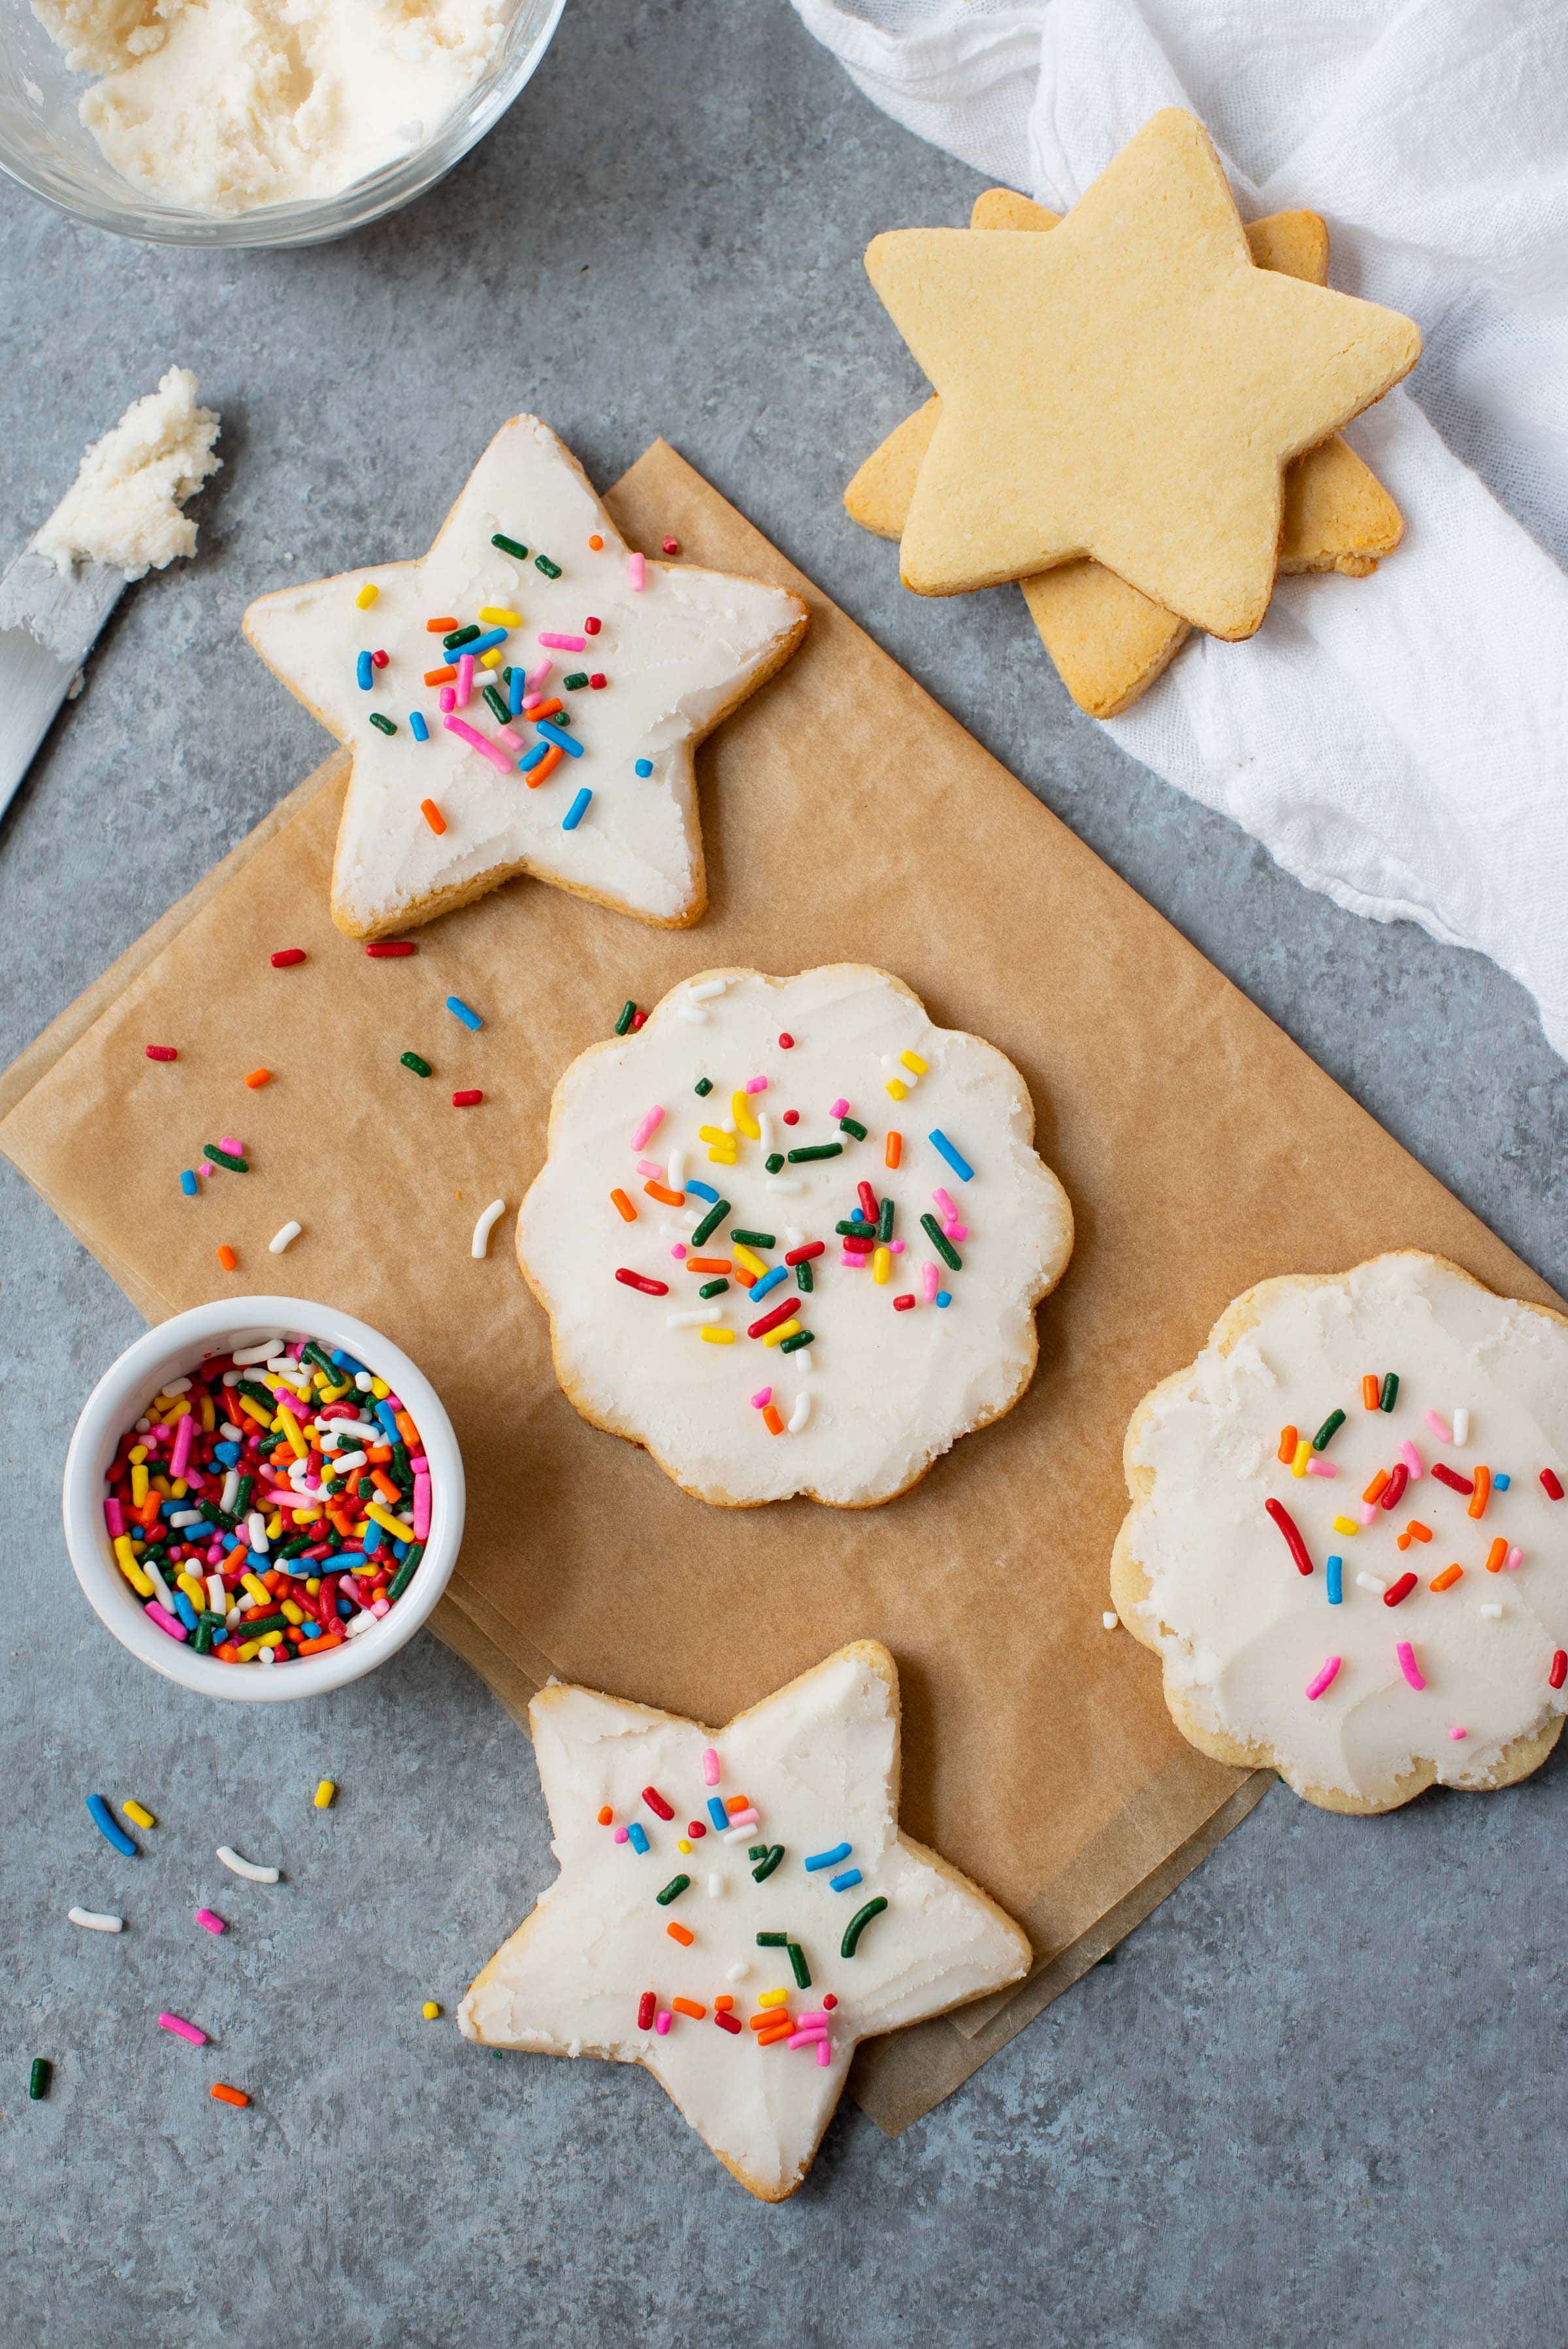 Grain-free paleo sugar cookies with coconut butter frosting and rainbow sprinkles